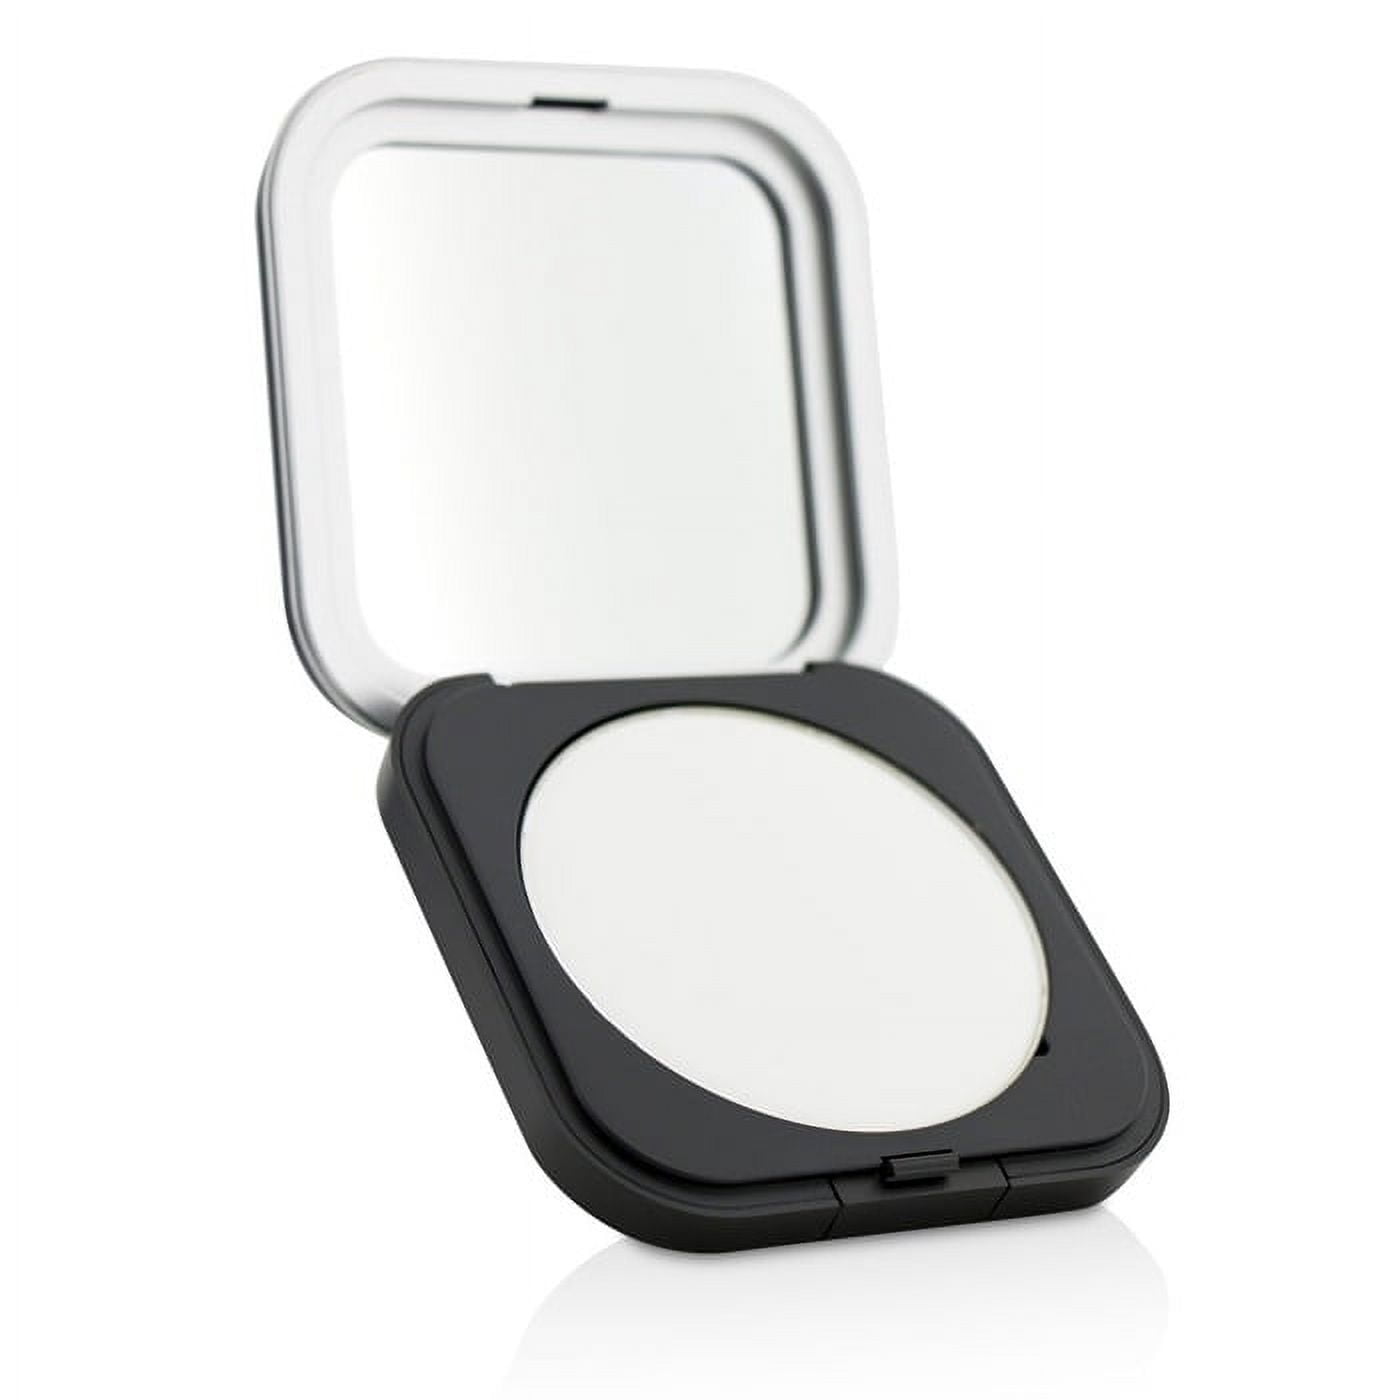  Make Up For Ever HD Microfinish Pressed Powder Travel size  2g/0.07 oz. (Compact) : Beauty & Personal Care